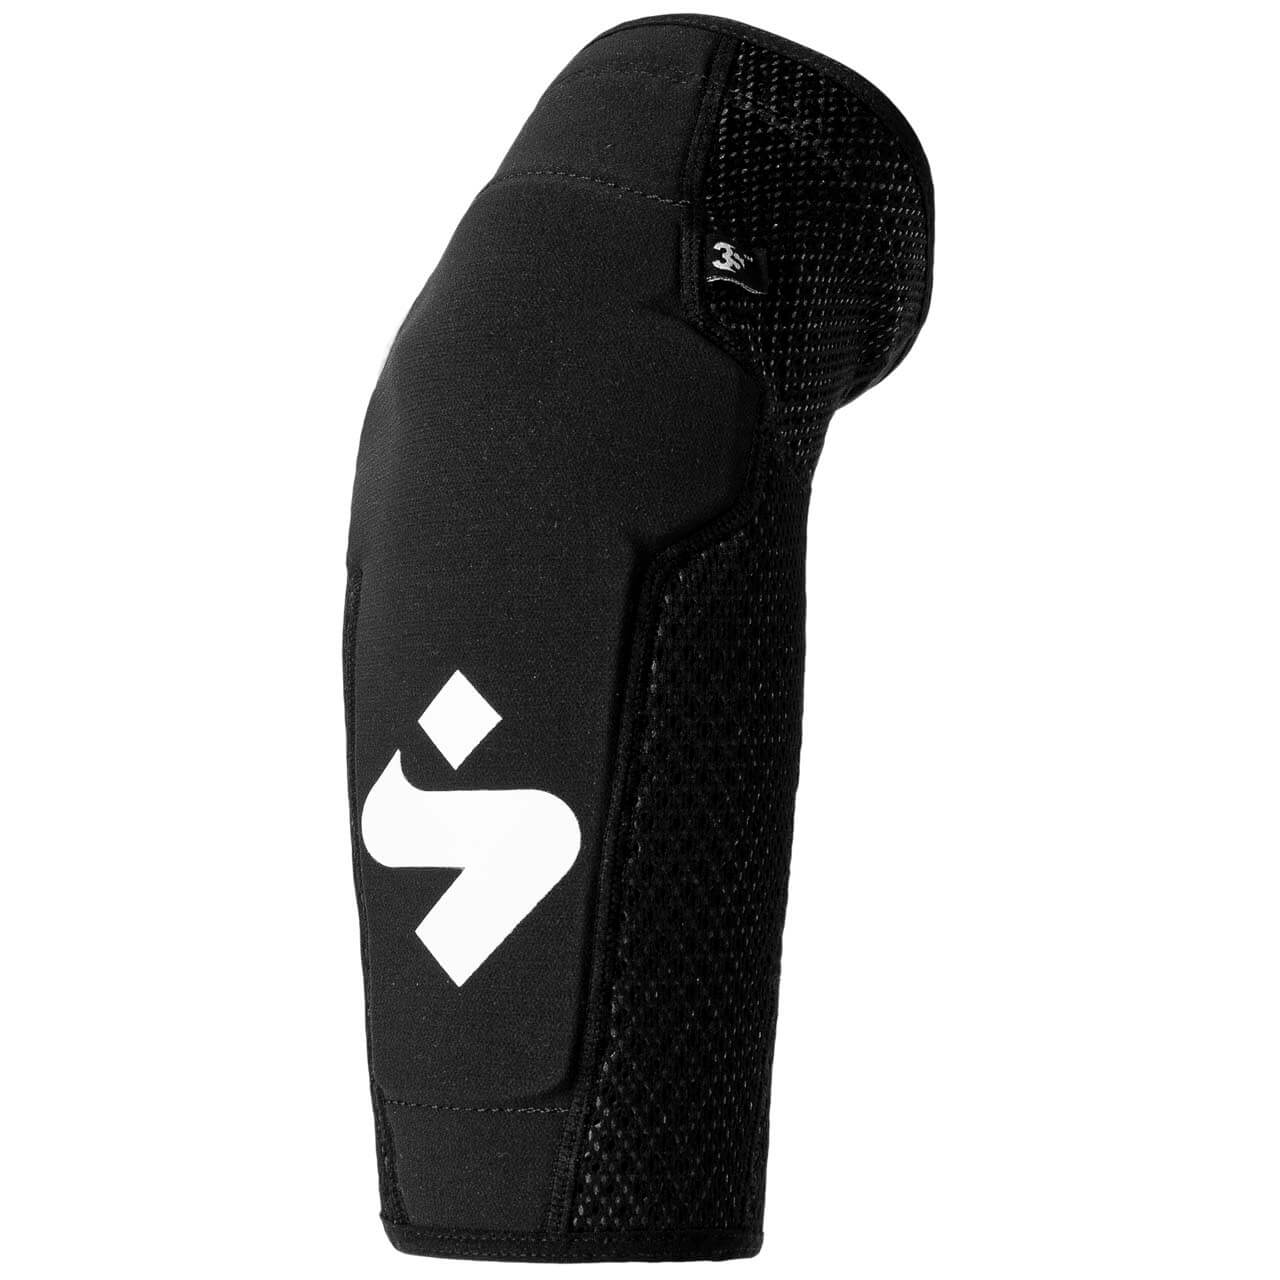 Sweet Protection Knee Guards Light - Black, L